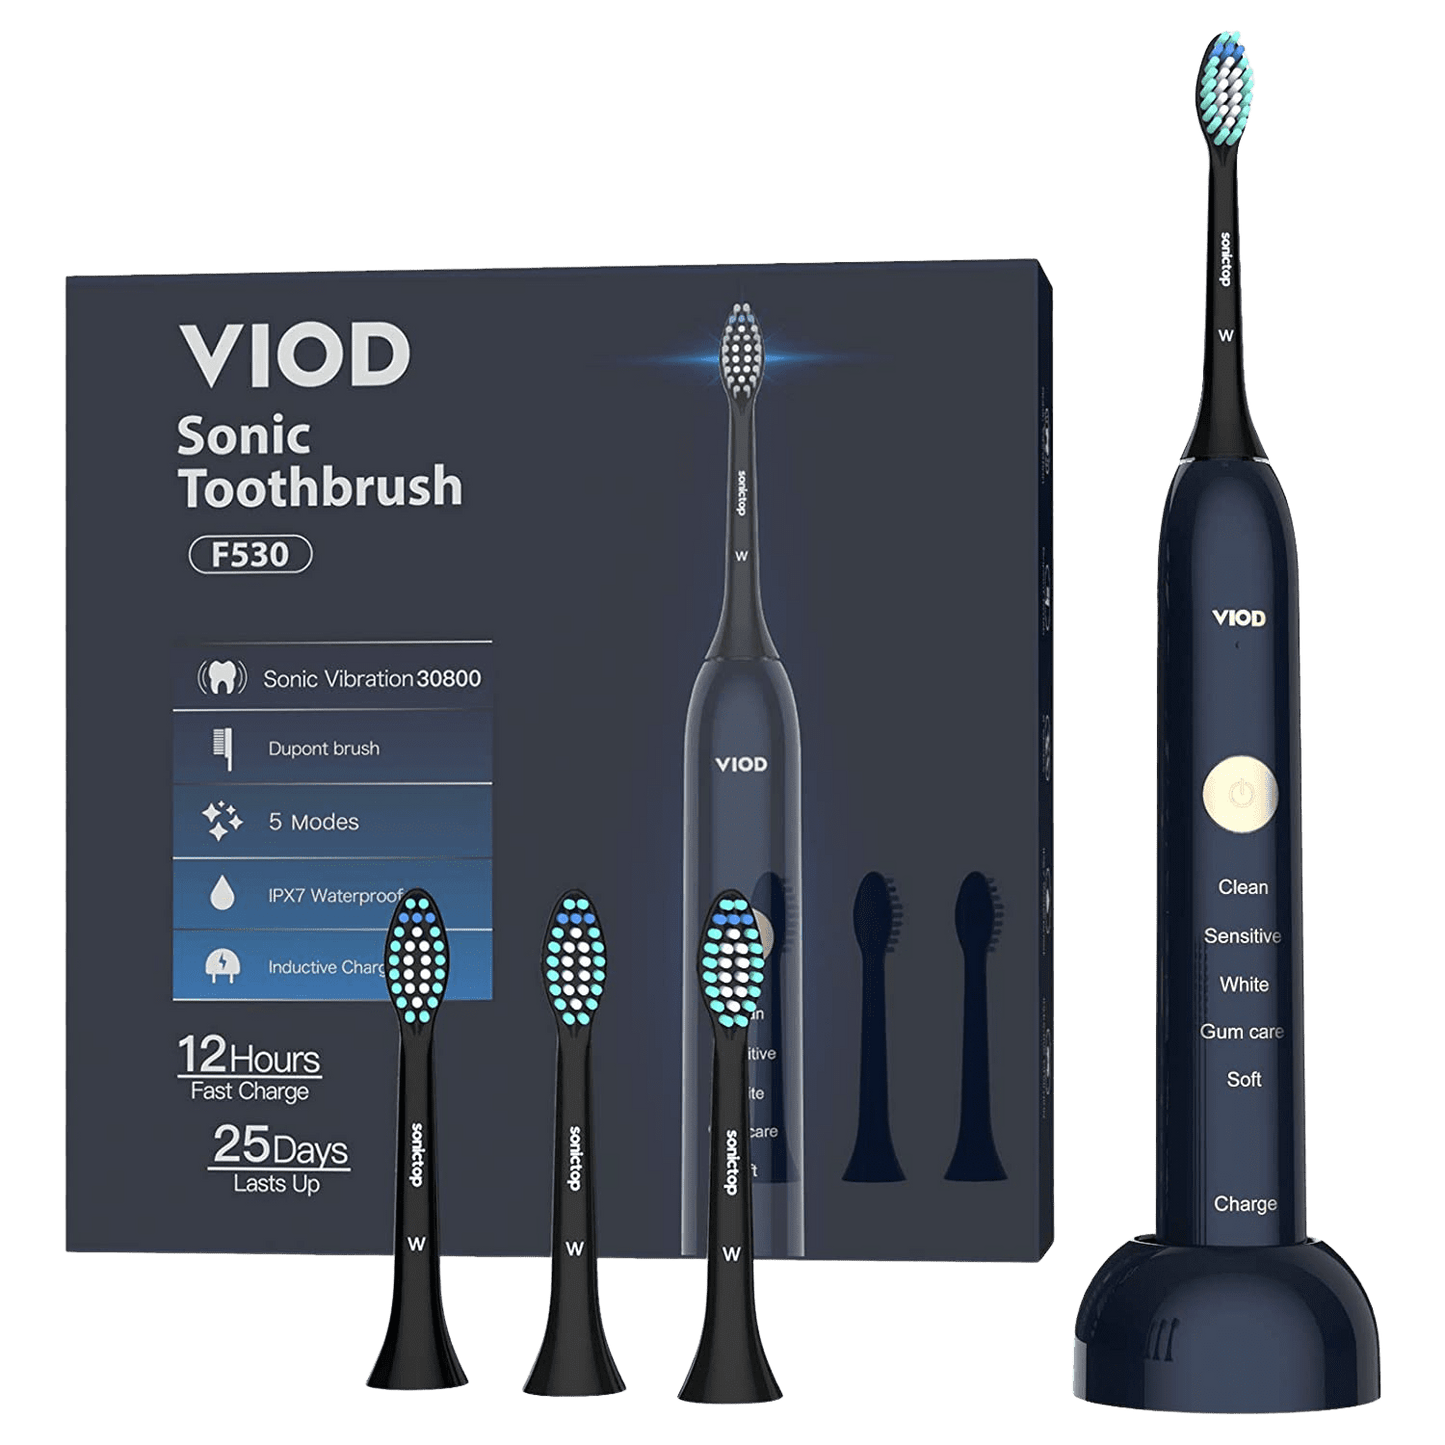 VIOD Sonic Electric Toothbrush Rechargeable Toothbrush for Adults Clean Teeth Whitening,4 Brush Heads,5 Modes Rechargeable,2 Mins Smart Timer-Dark Blue - Home Decor Gifts and More